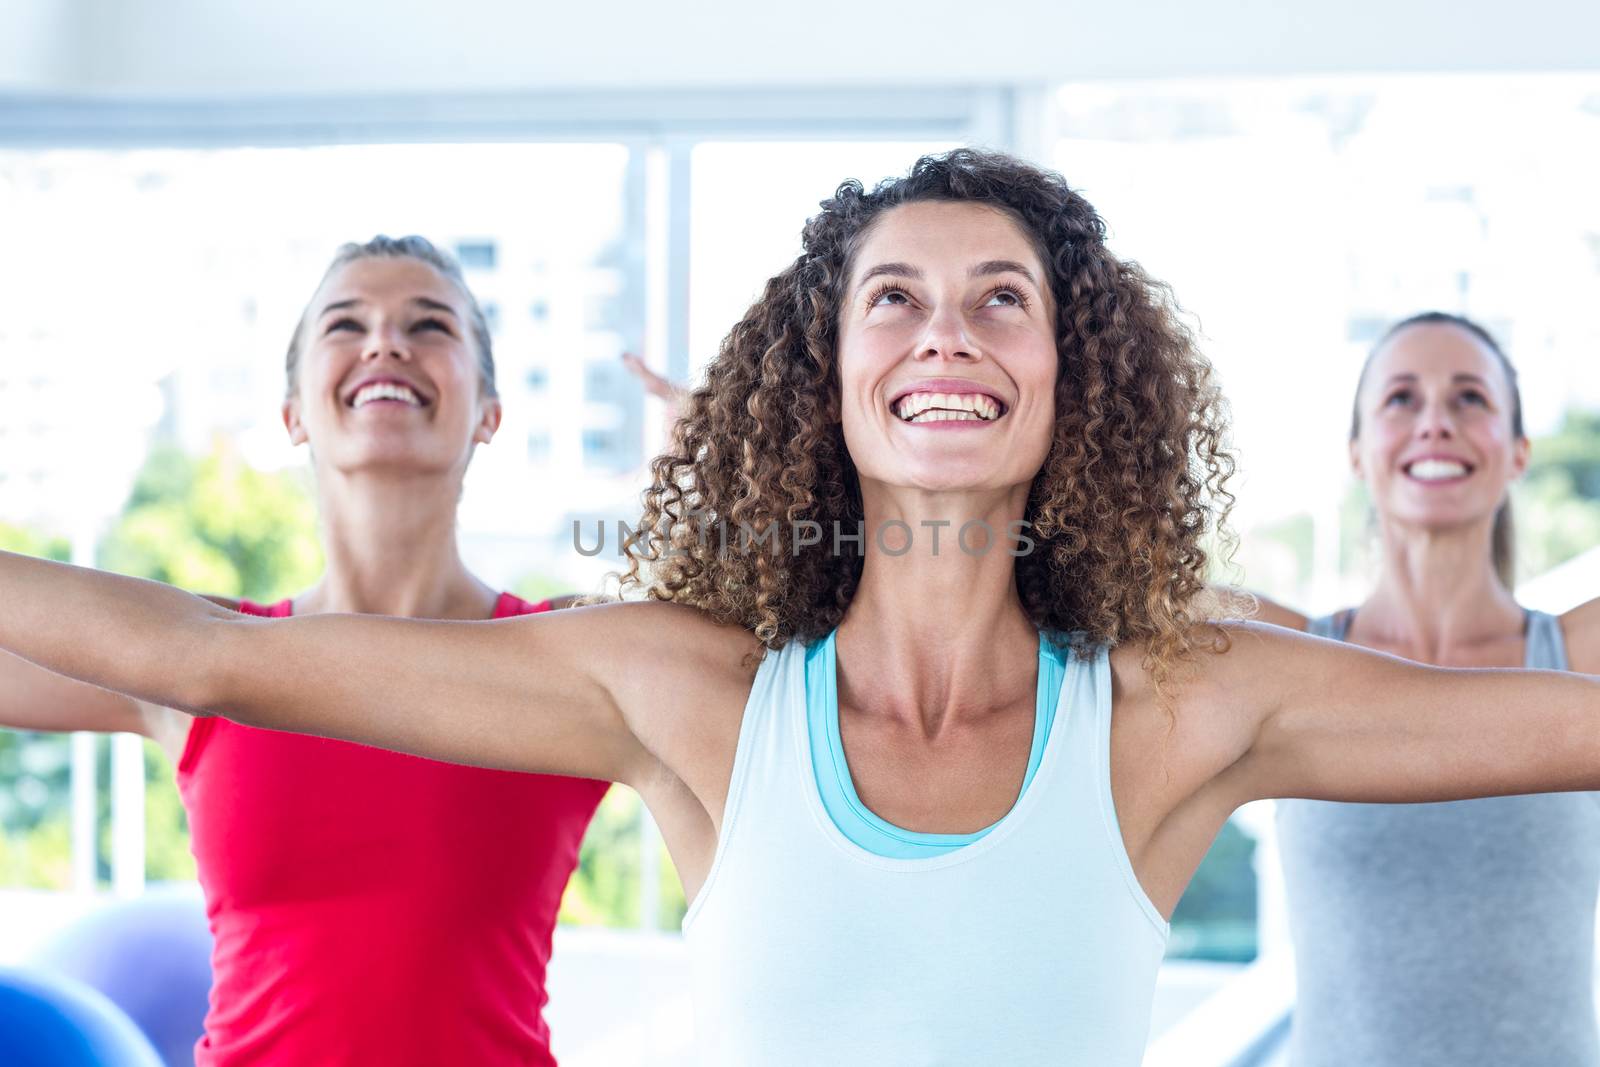 Fit women looking up and smiling with arms outstretched in fitness studio